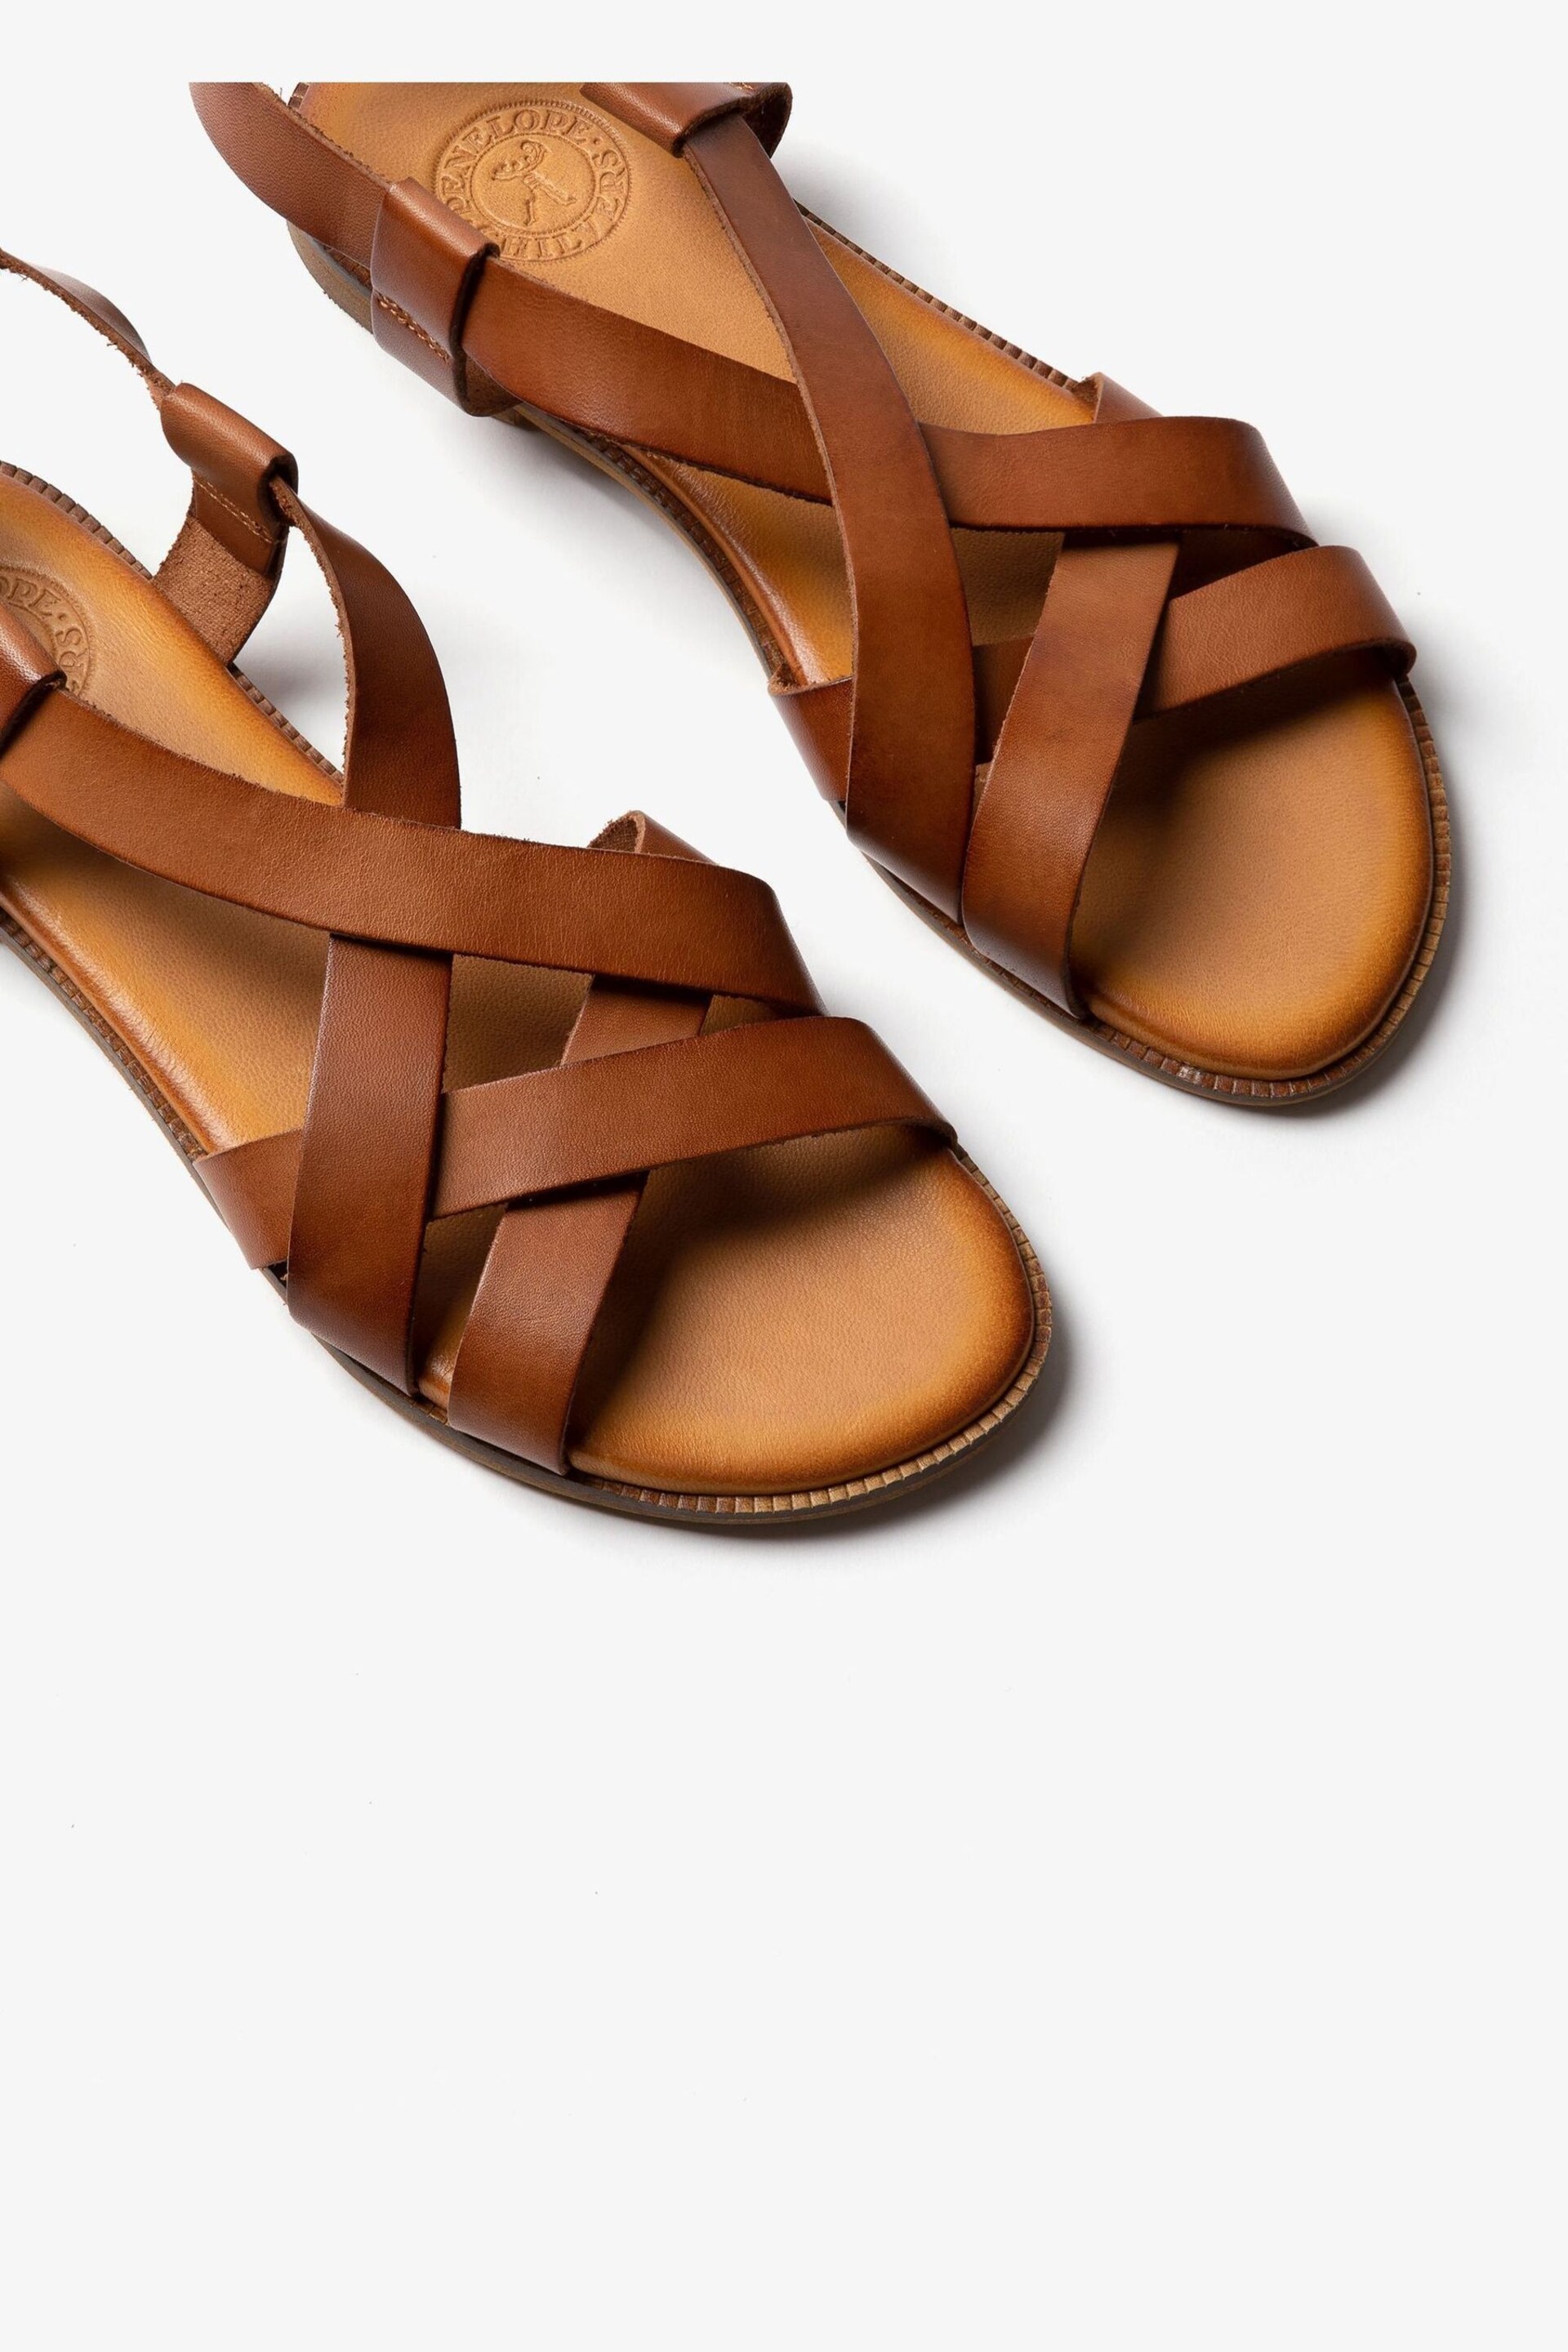 Penelope Chilvers Buttercup Brown Leather Sandals - Image 4 of 5